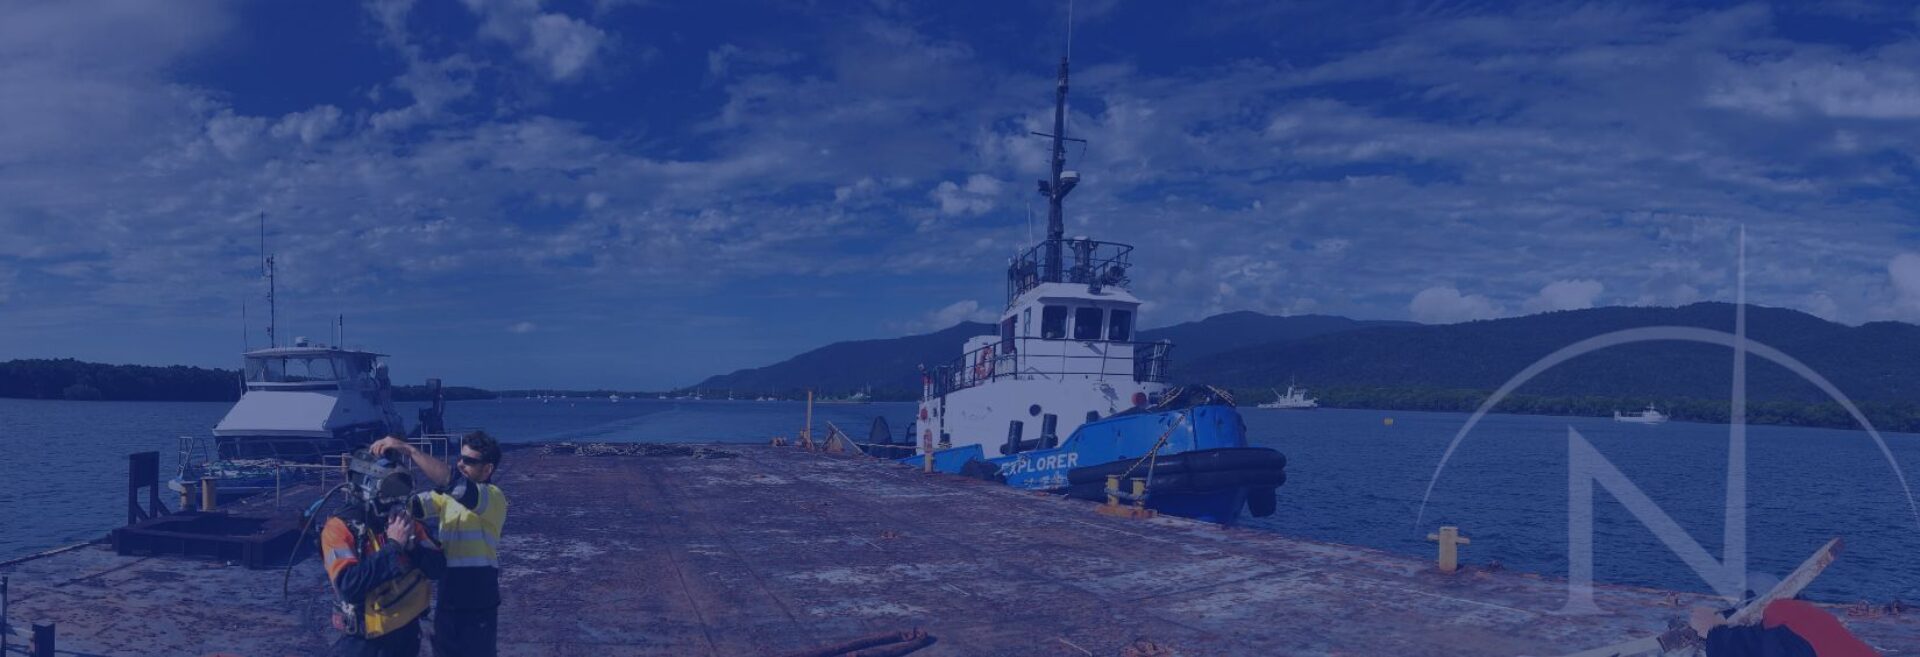 North Marine | Vessel Charter · Tugboat · Commercial Diving Company in Cairns, Queensland